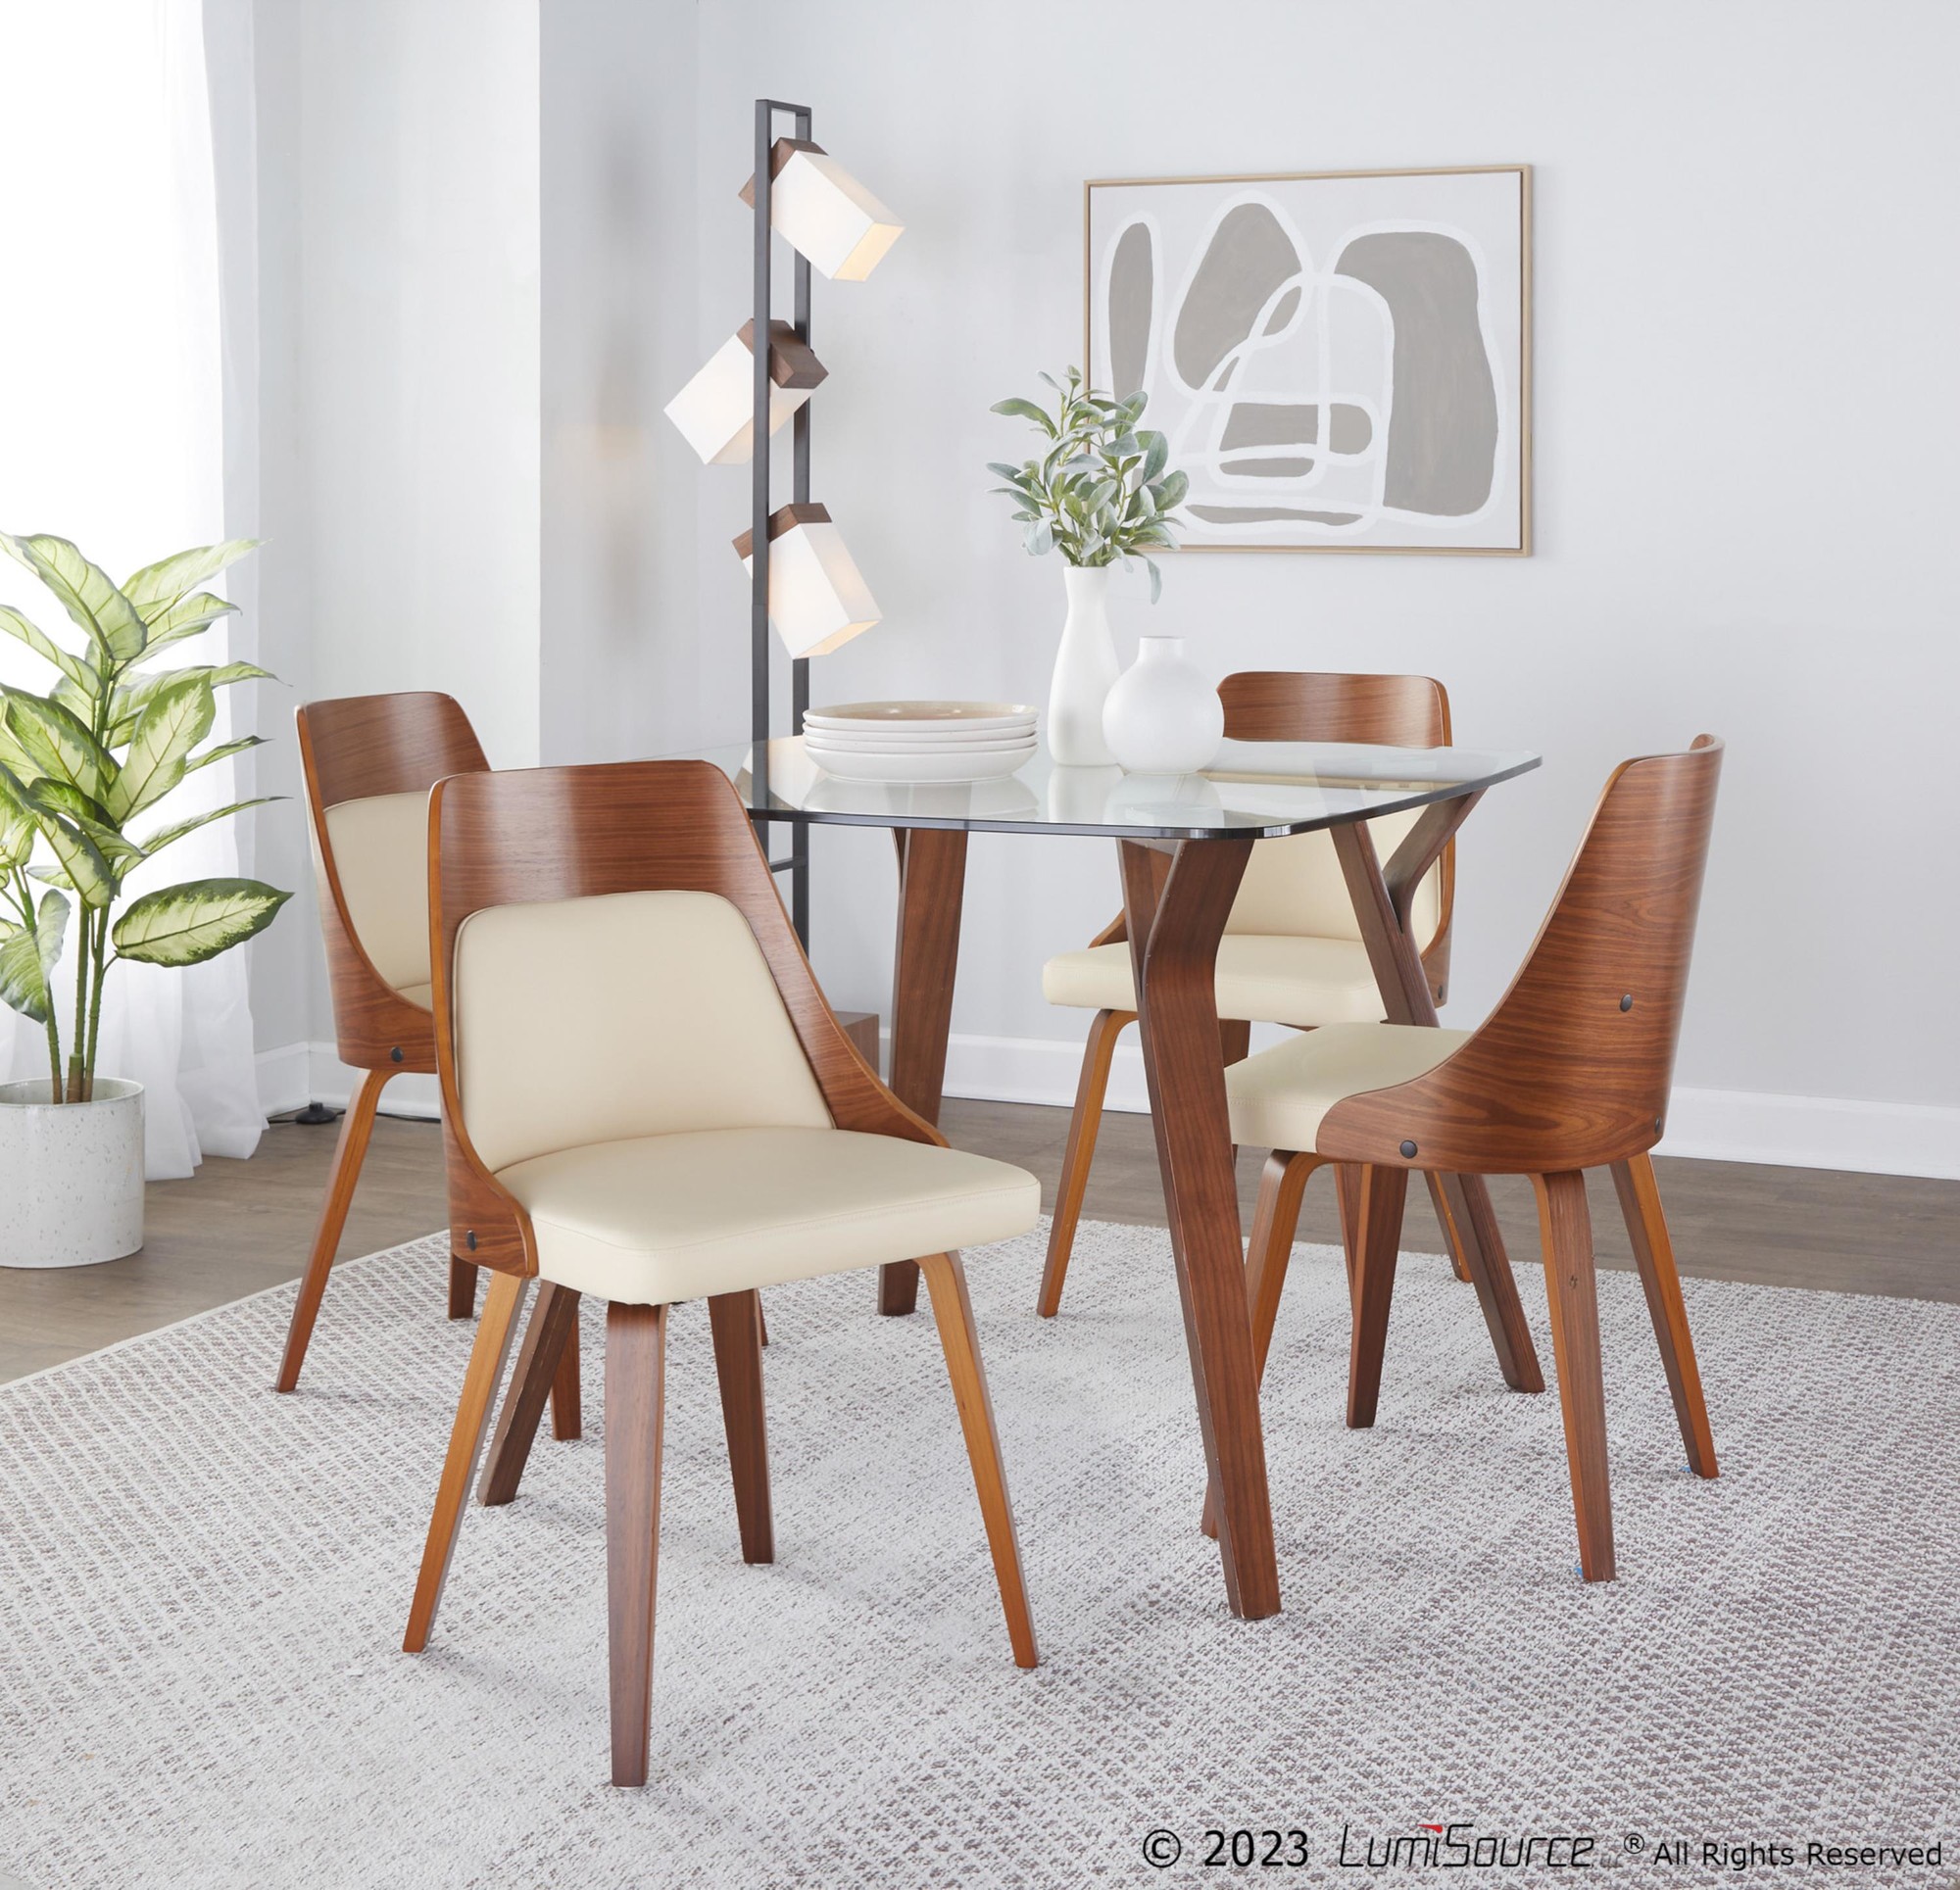 Folia-anabelle Square Dining Set - 5 Piece